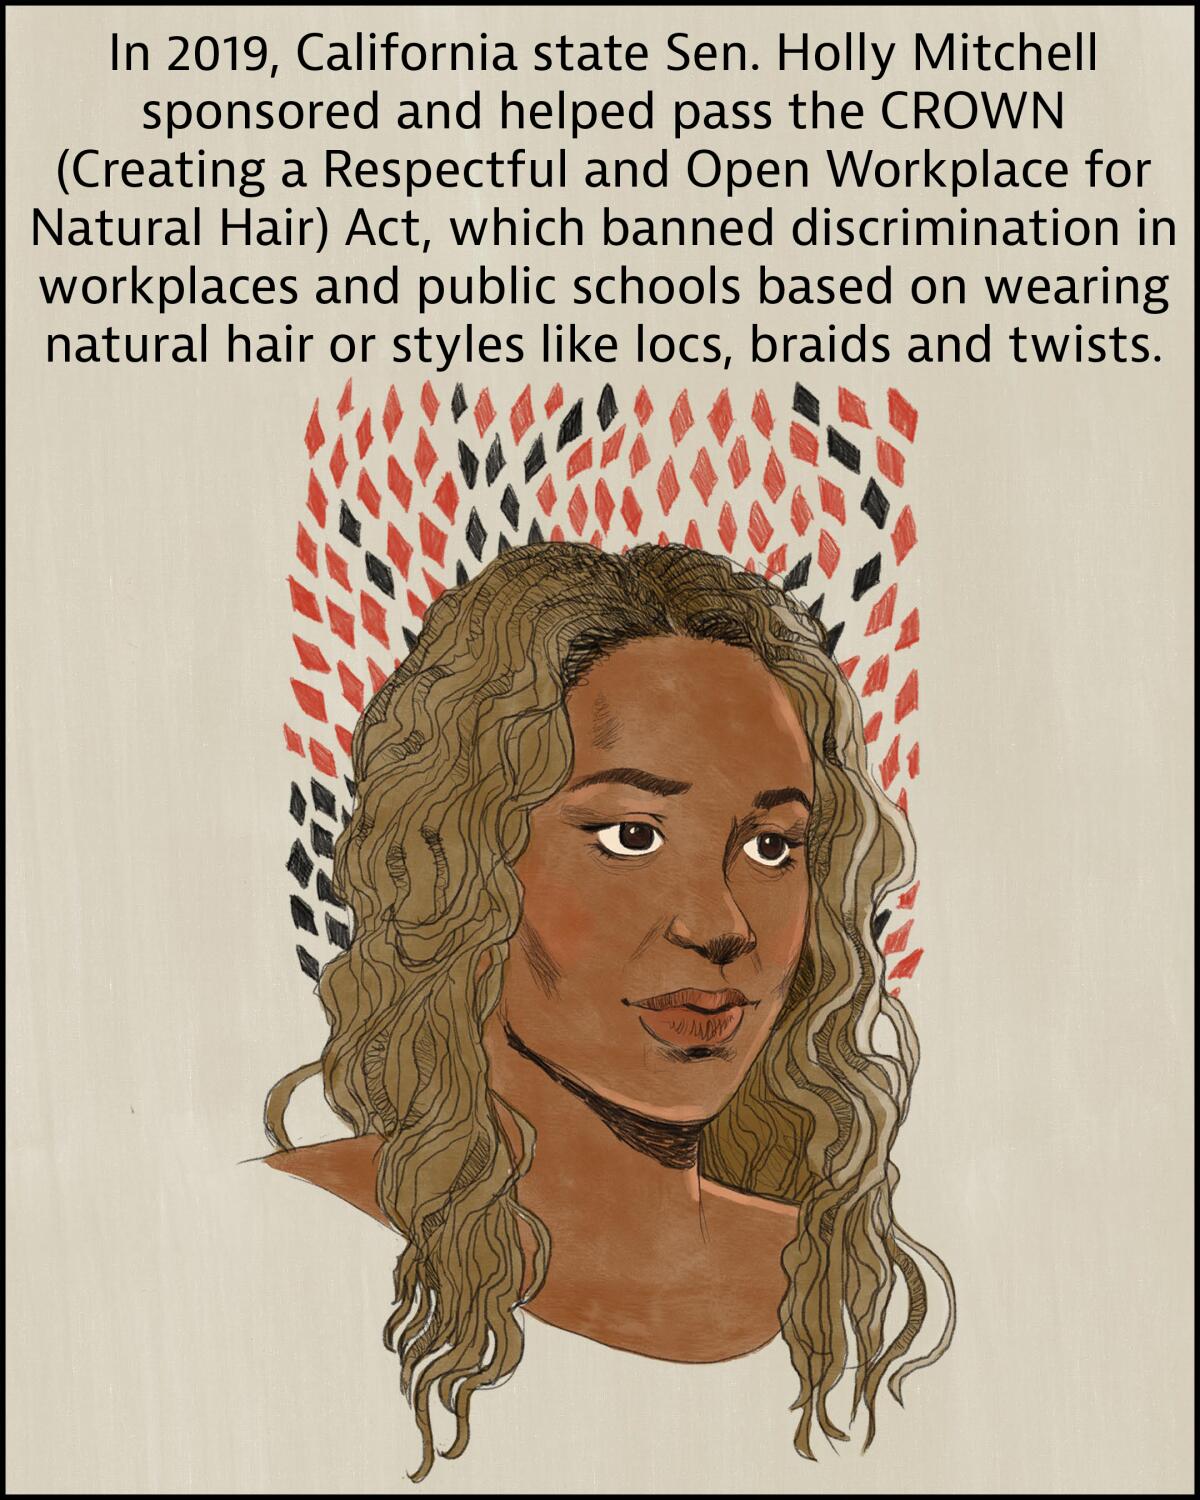 In 2019, Sen. Holly Mitchell helped pass Creating a Respectful an Open Workplace for Natural Hair which banned discrimination